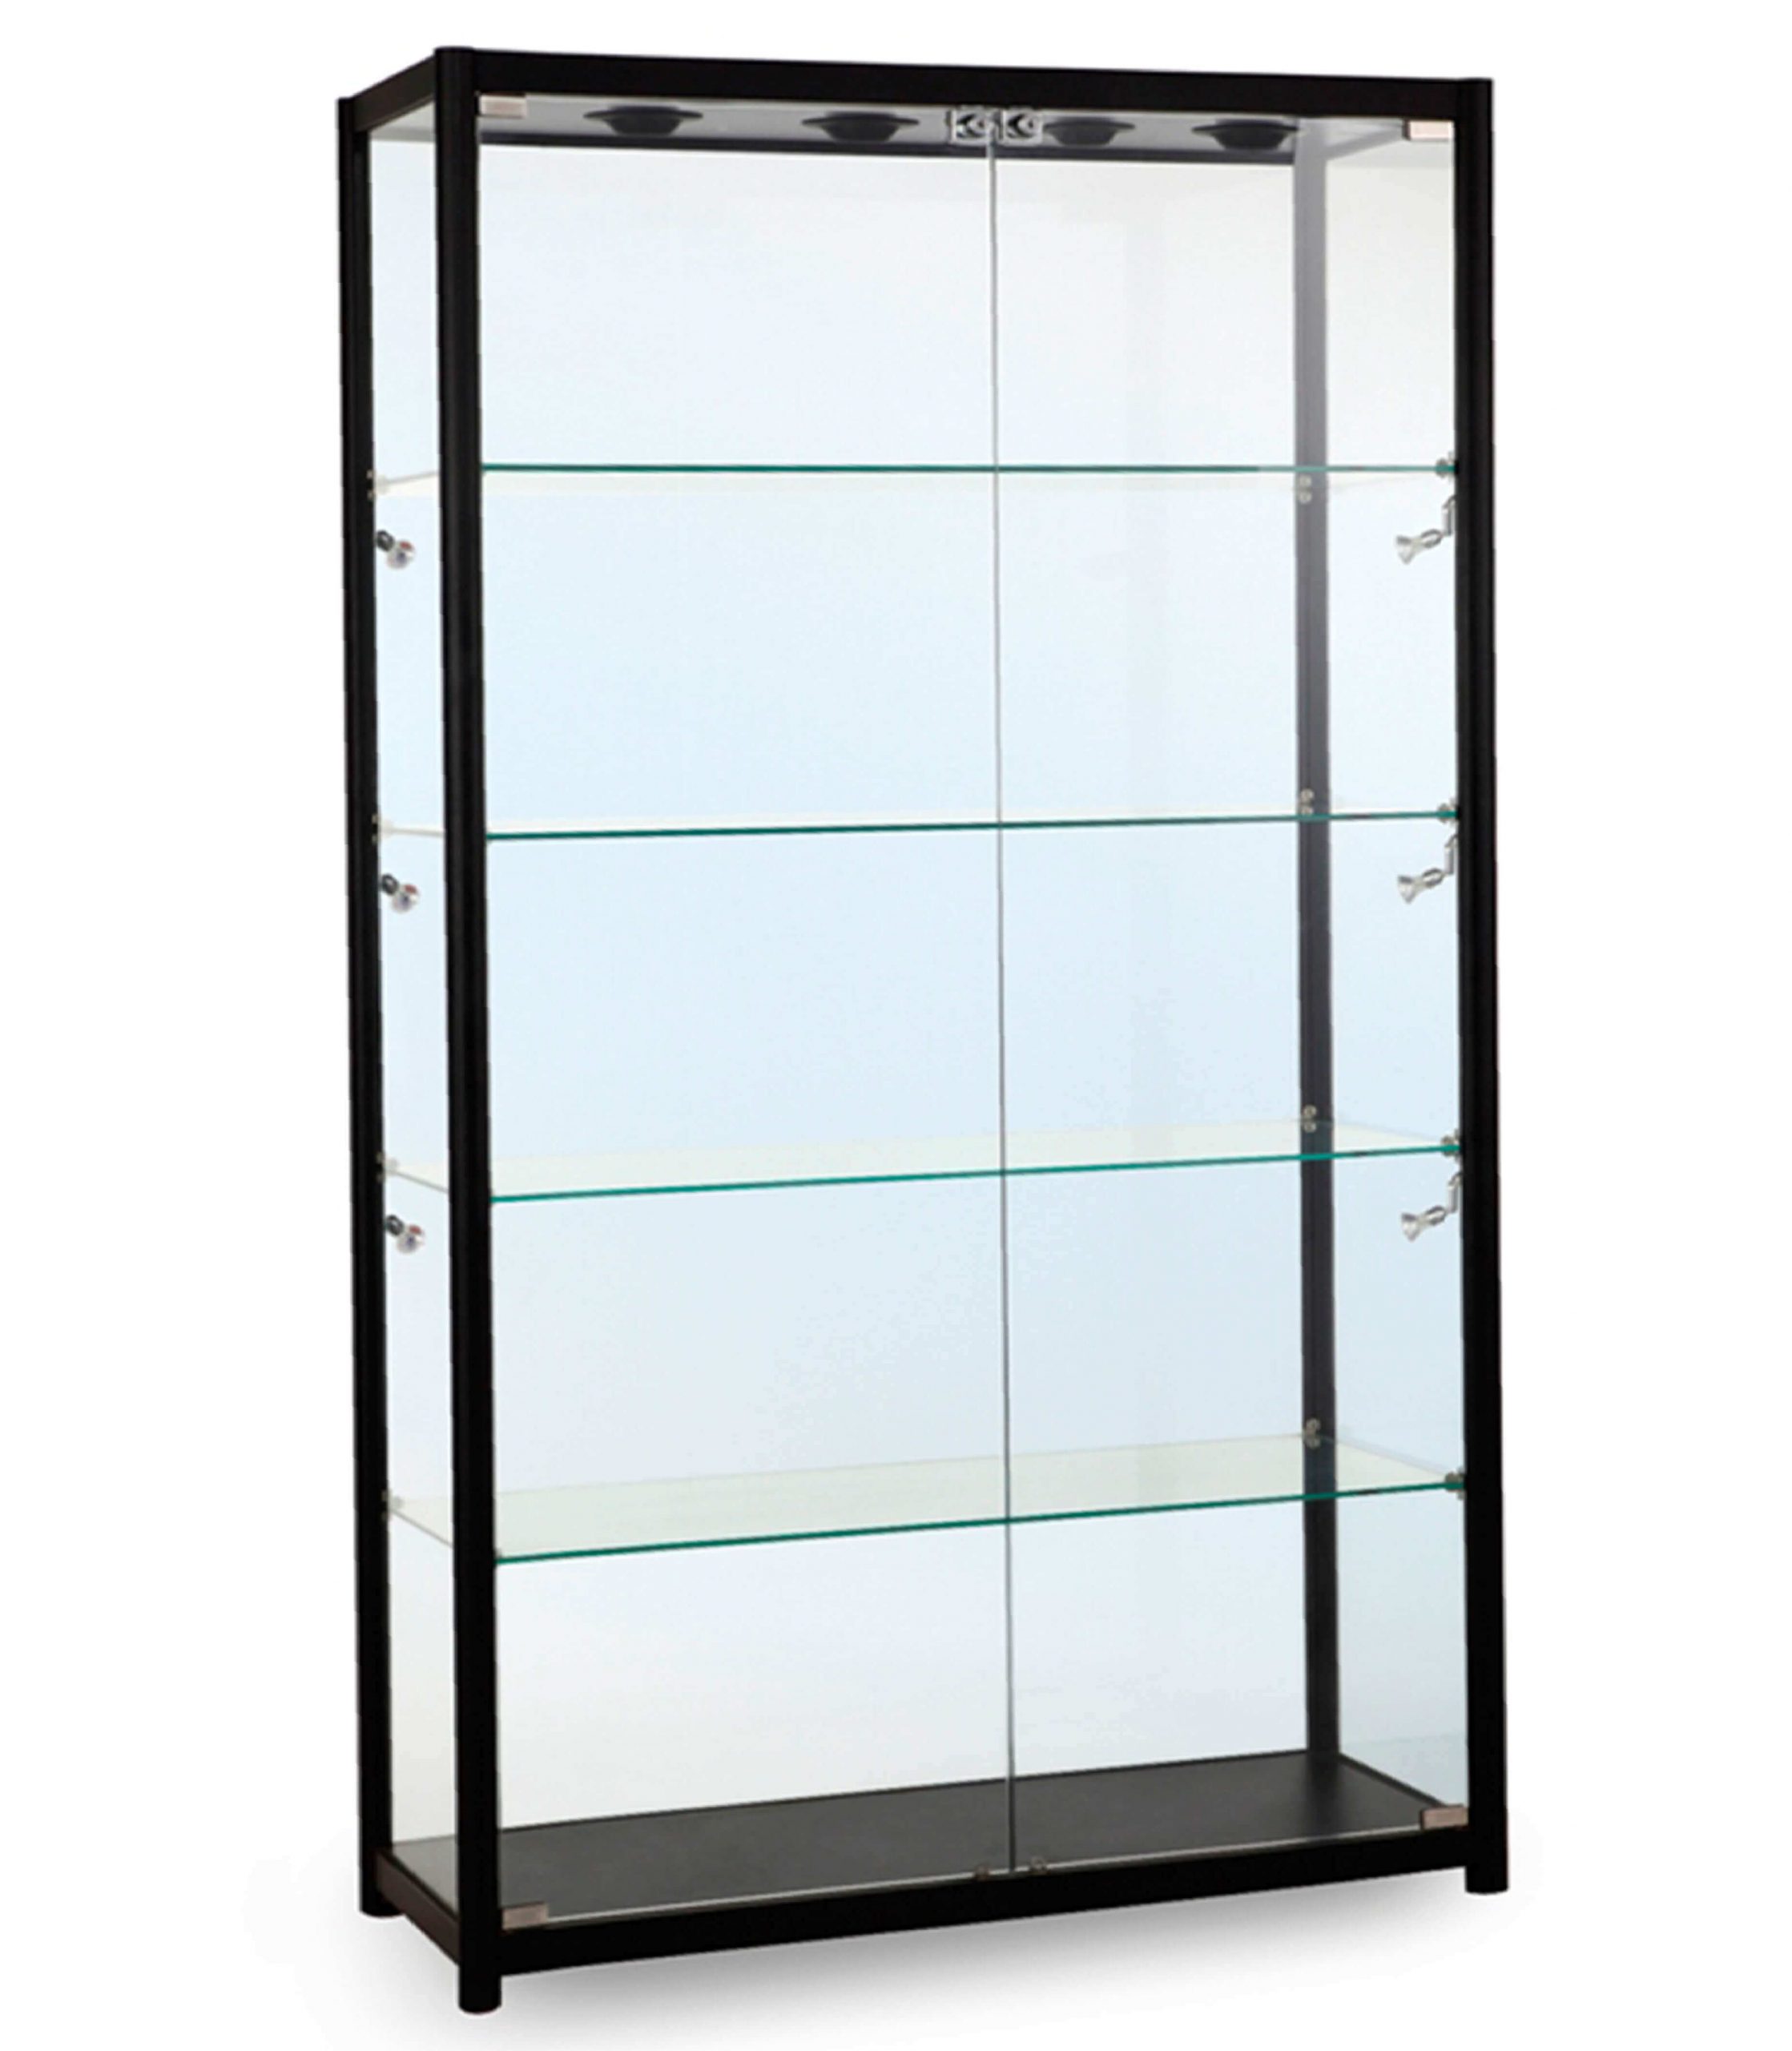 How To Build A Display Cabinets Glass - Image to u